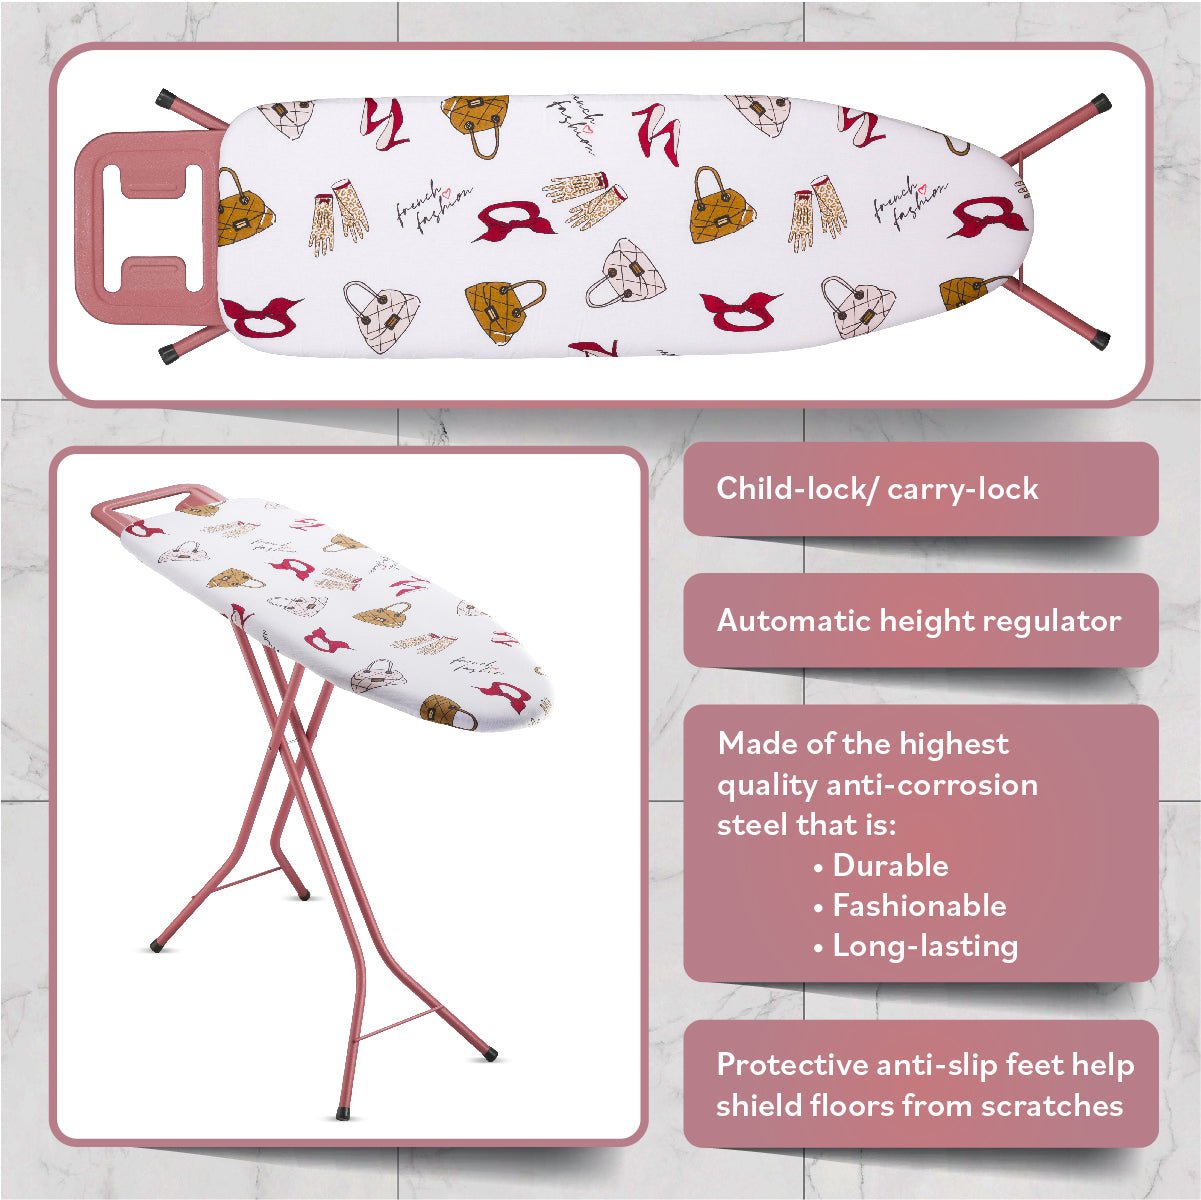 Bartnelli Ironing Board Made in Europe | Iron Board with 4 Layered Cover & Pad, Height Adjustable up to 36" Features A Safety Iron Rest, 4 Steel Rose Legs, for Home Laundry Room or Dorm Use (43x14) (ROSE LEGS FRENCH FASHION COVER)